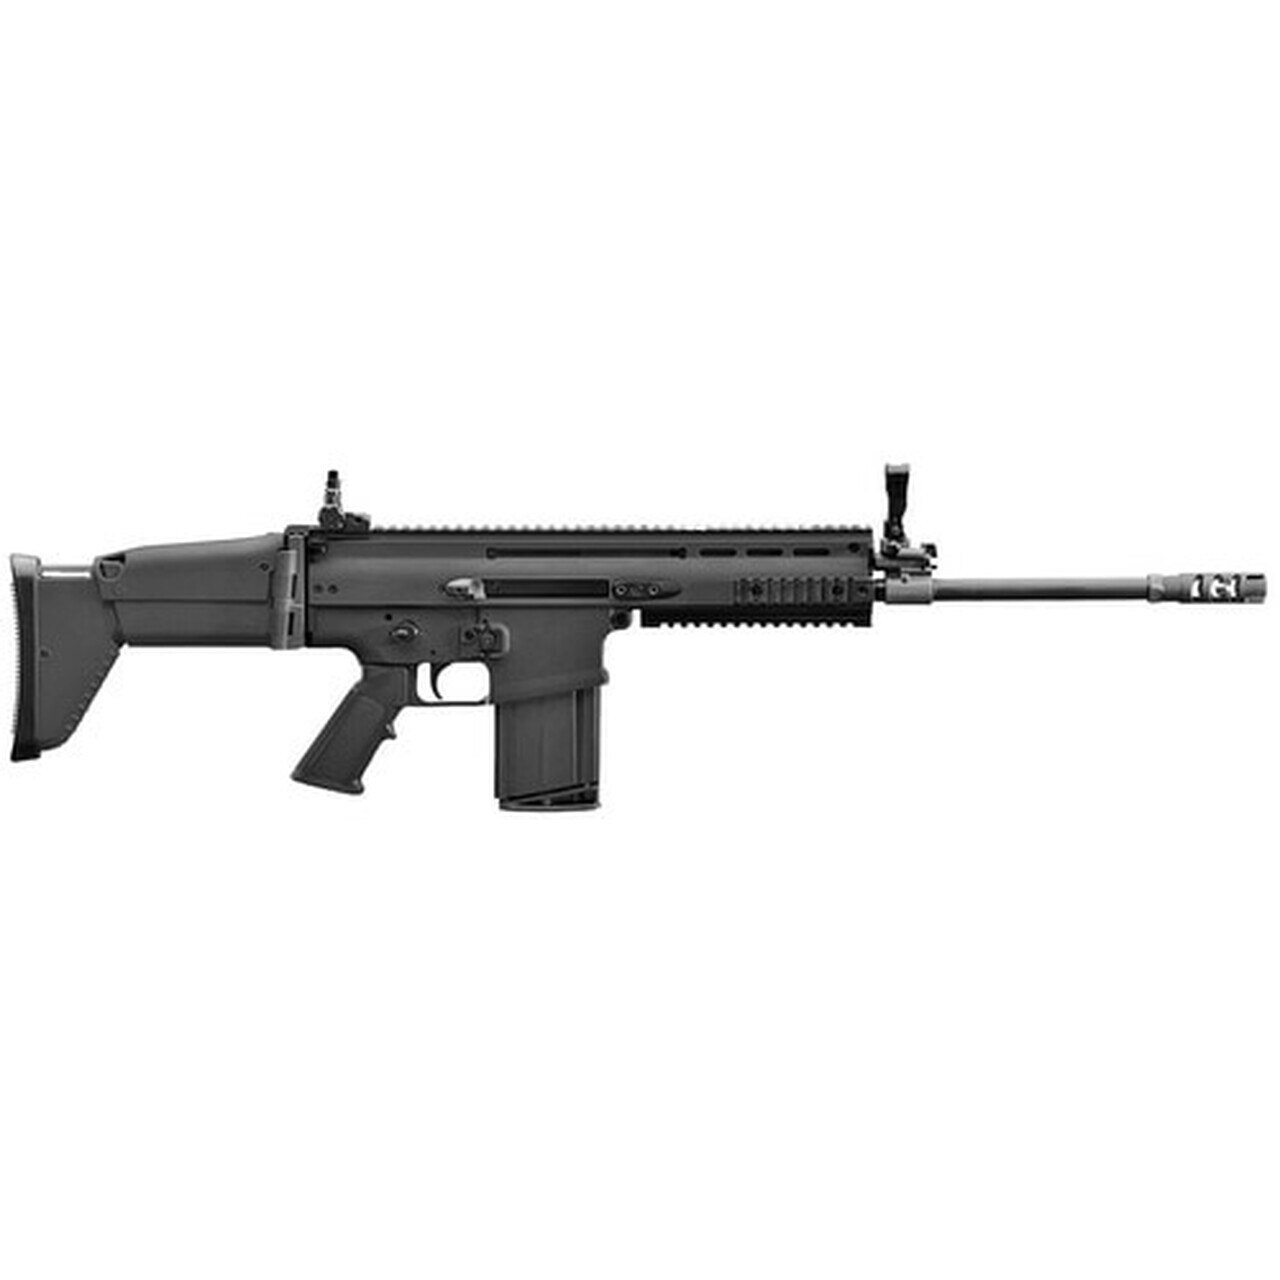 Image of FN SCAR 17S 308 Win/762NATO, 16" Chrome Lined Barrel, Side Folding Stock, 20Rd, American Made